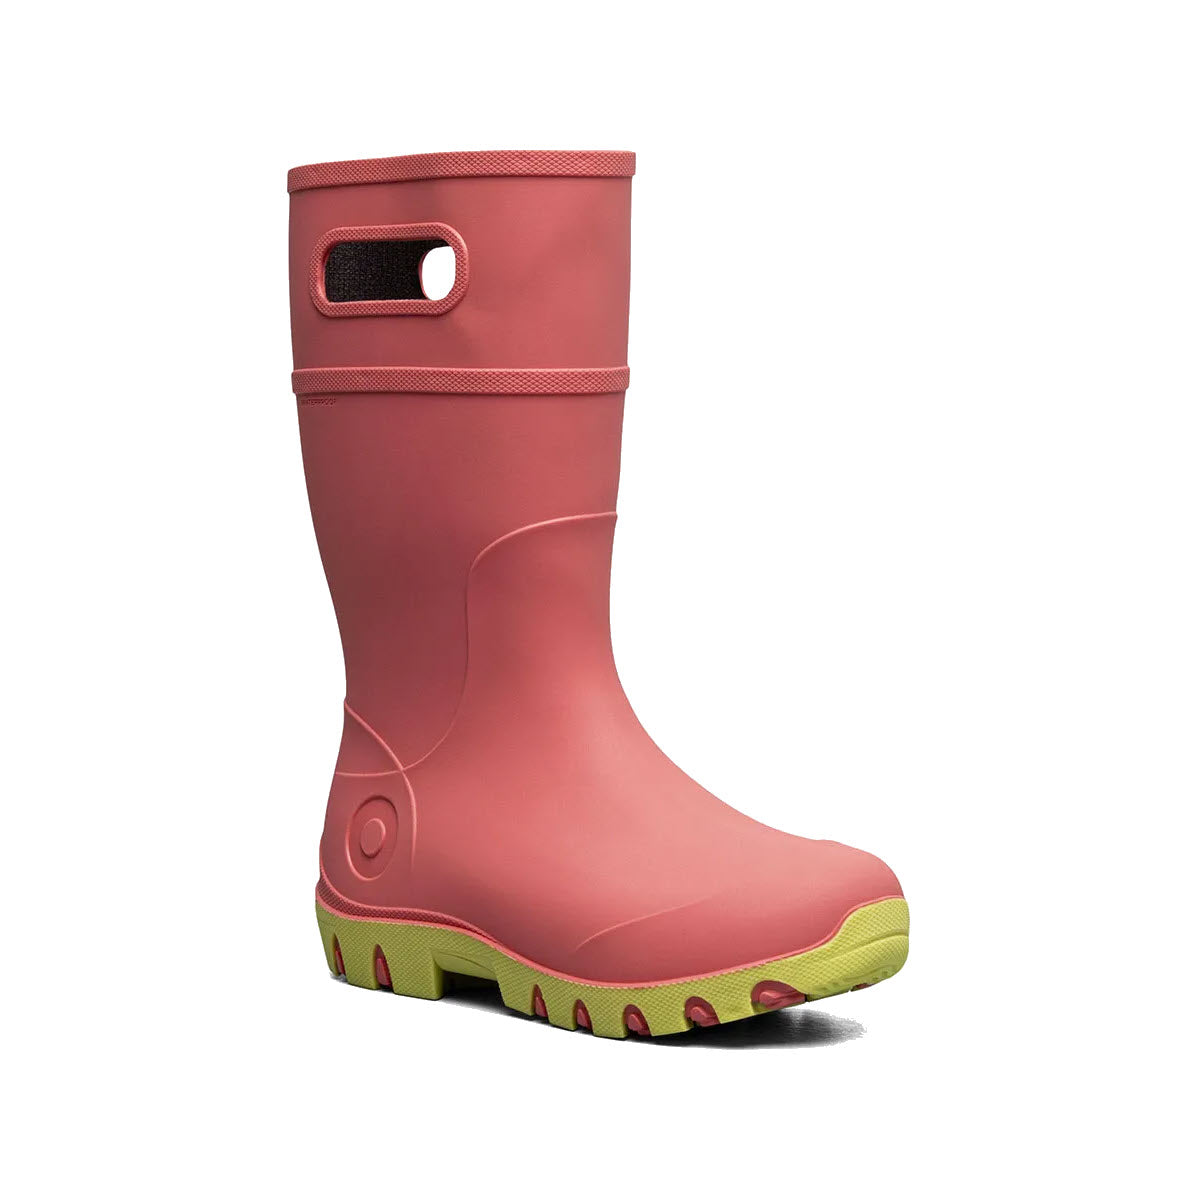 A single coral pink BOGS ESSENTIAL RAIN TALL PINK - KIDS rubber boot with a handle on the side and green soles, isolated on a white background.